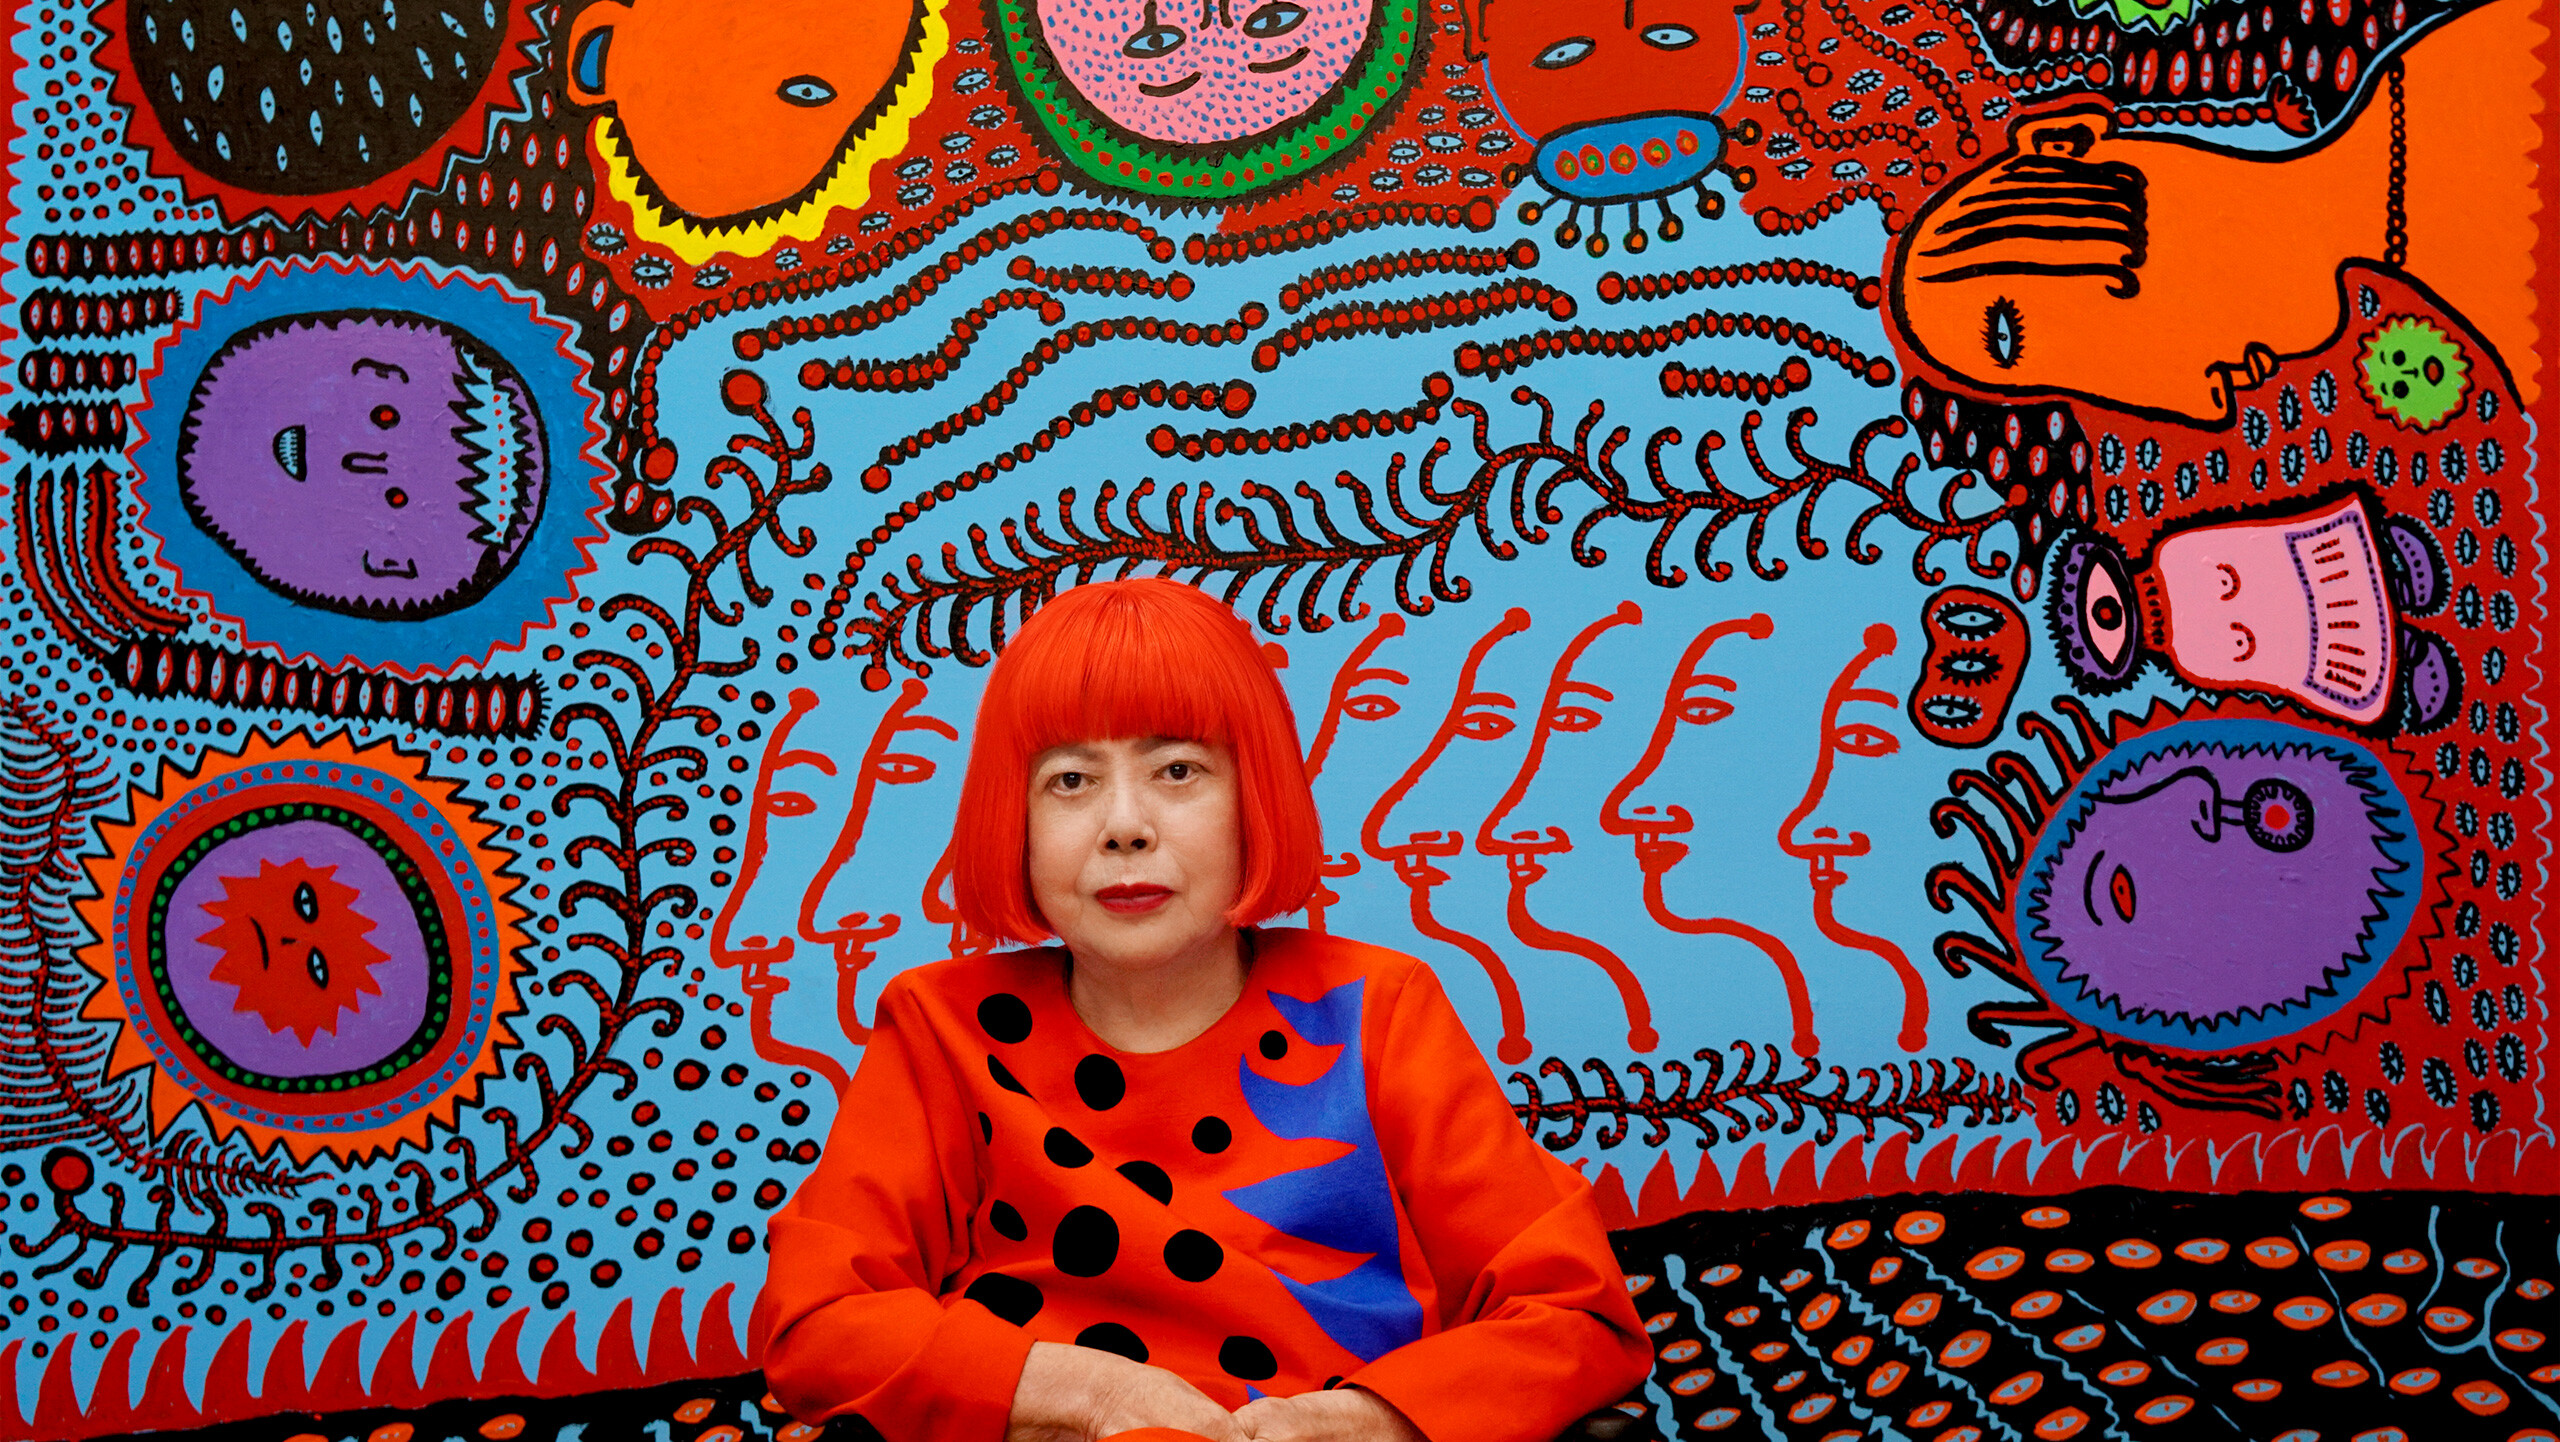 Who says New York isn't colorful in January?! Yayoi Kusama for